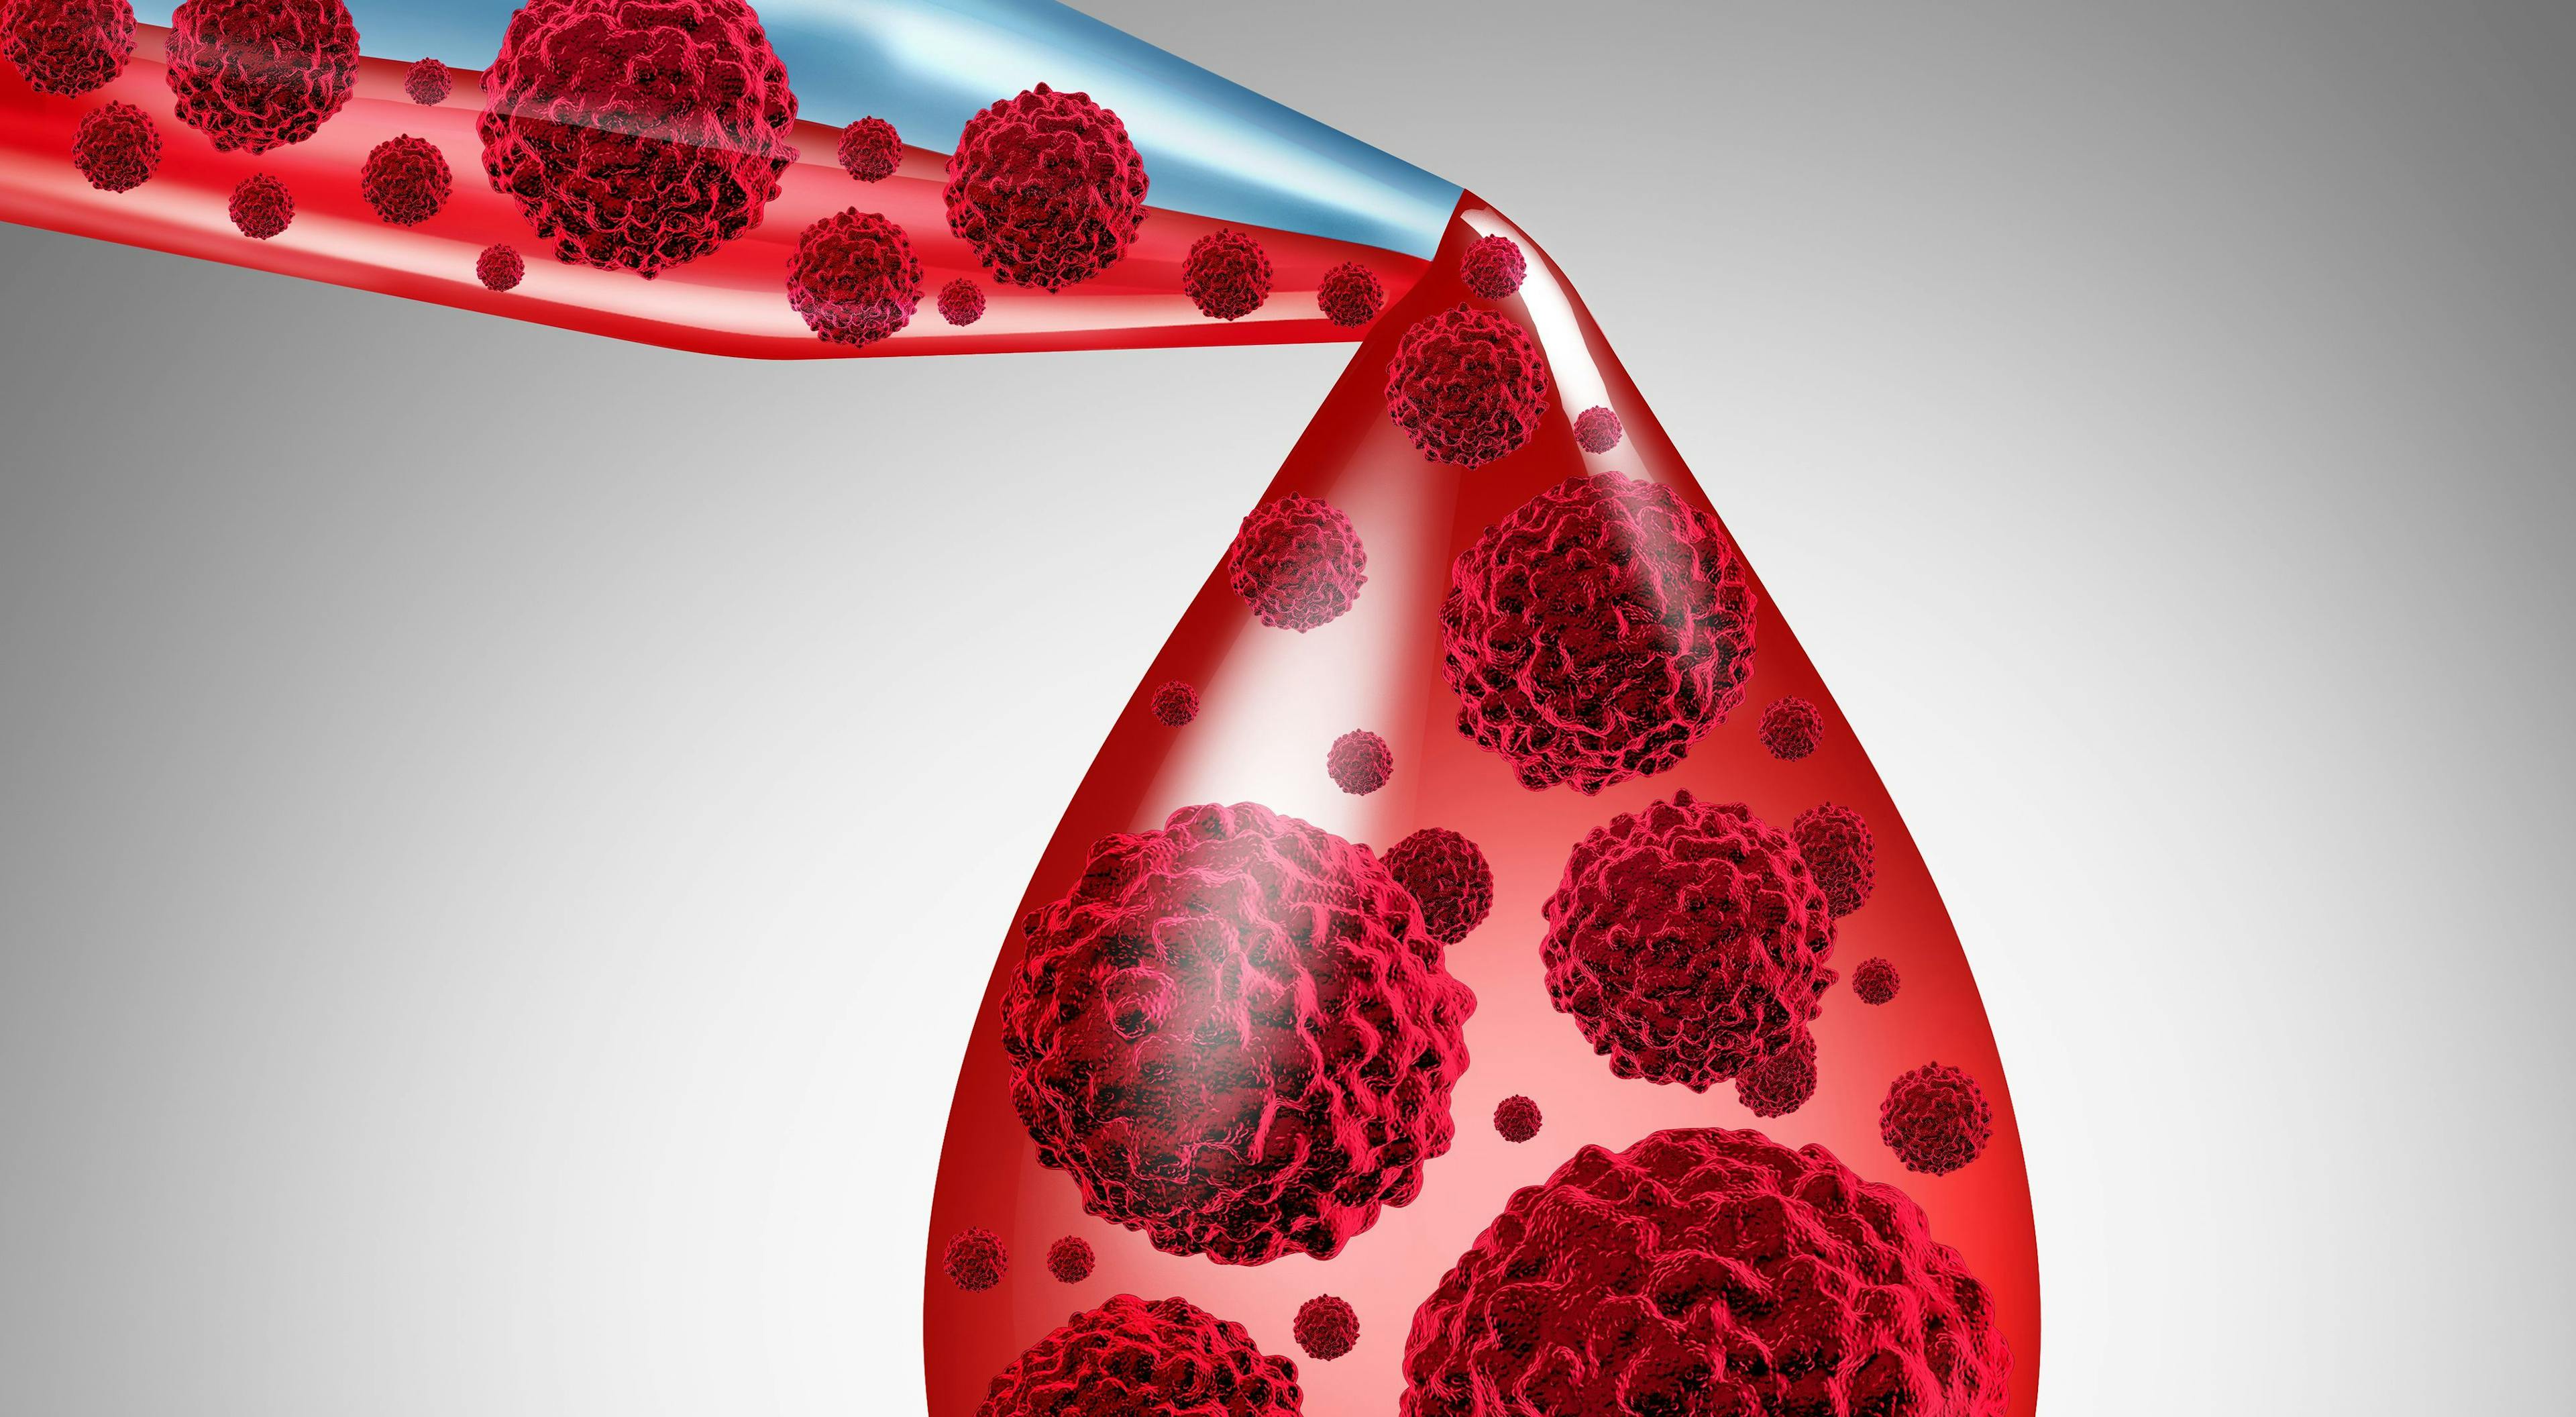 Enzastaurin May Show Benefit in Subgroup of Patients with Diffuse Large B-Cell Lymphoma